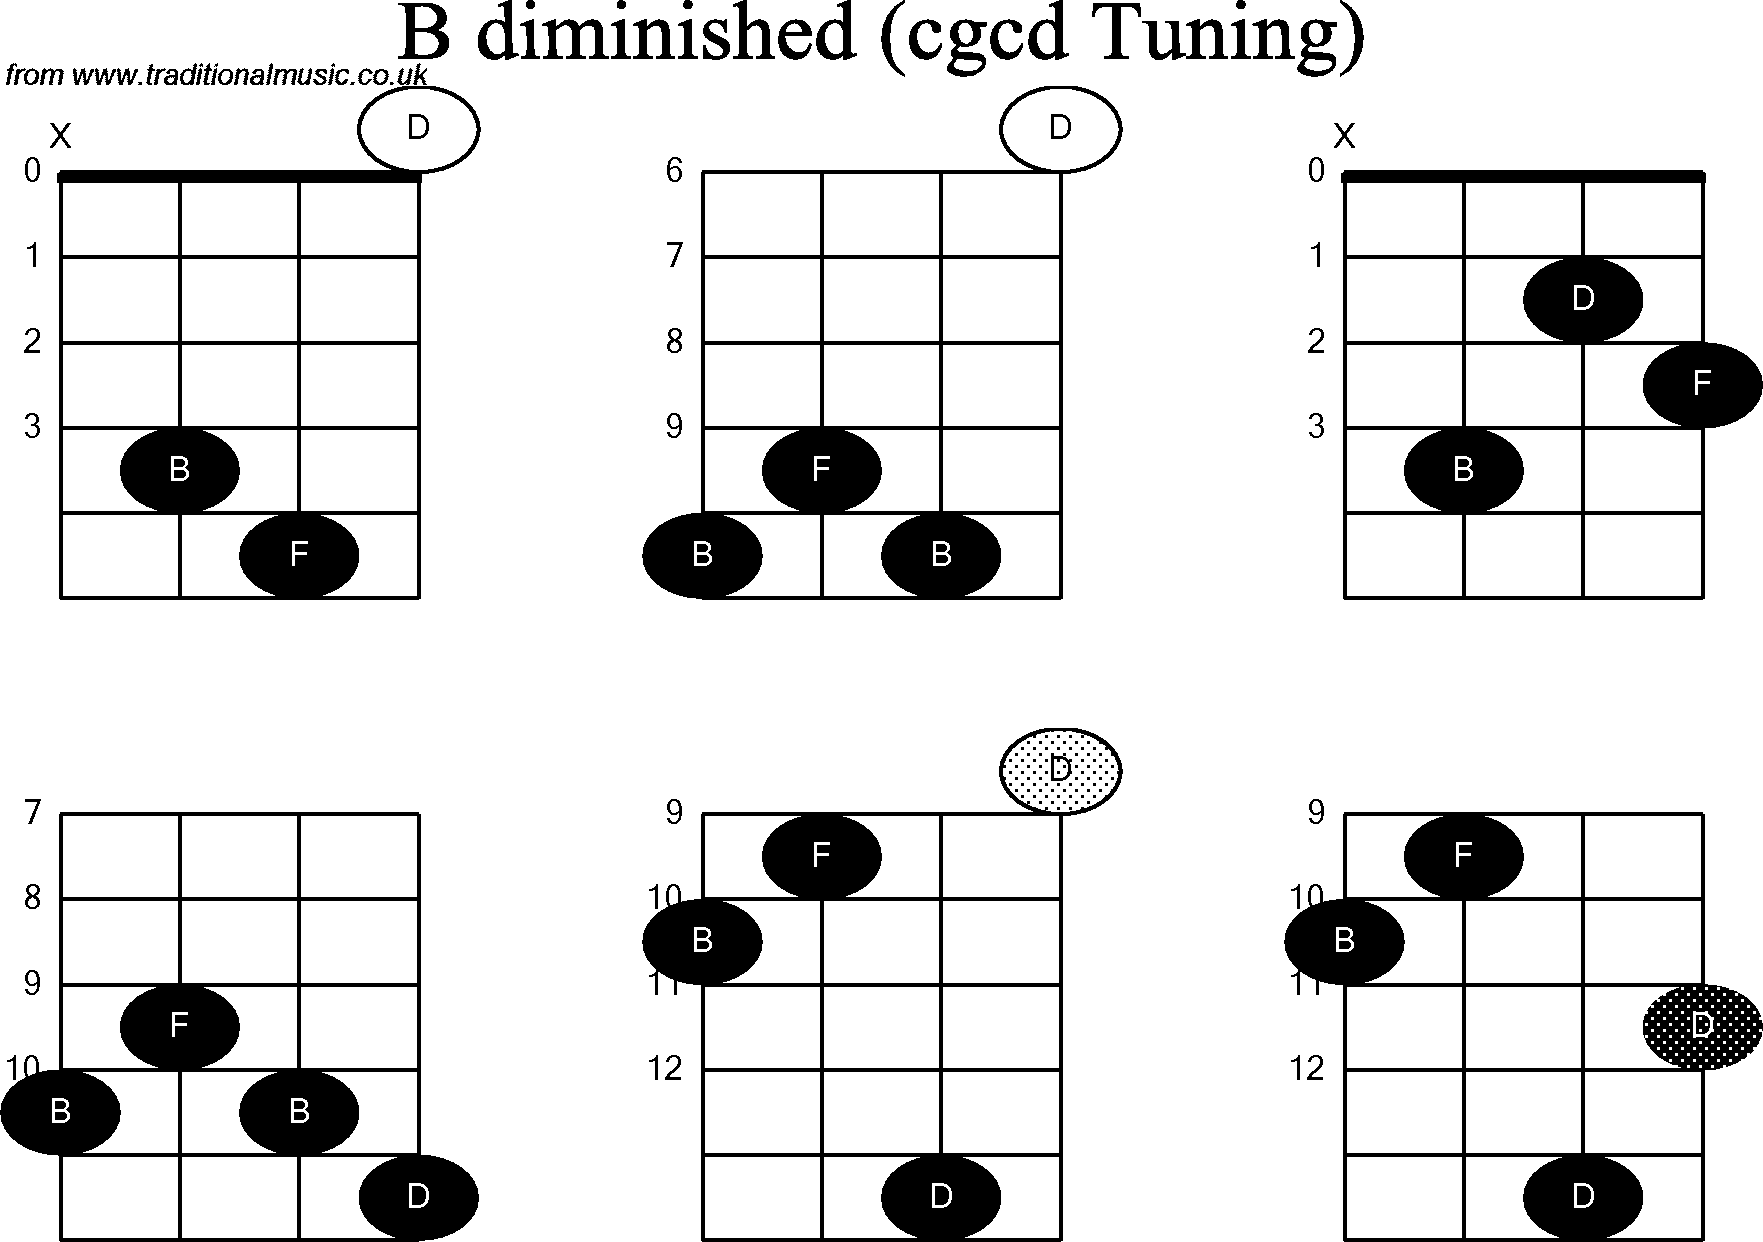 Chord diagrams for Banjo(Double C) B Diminished